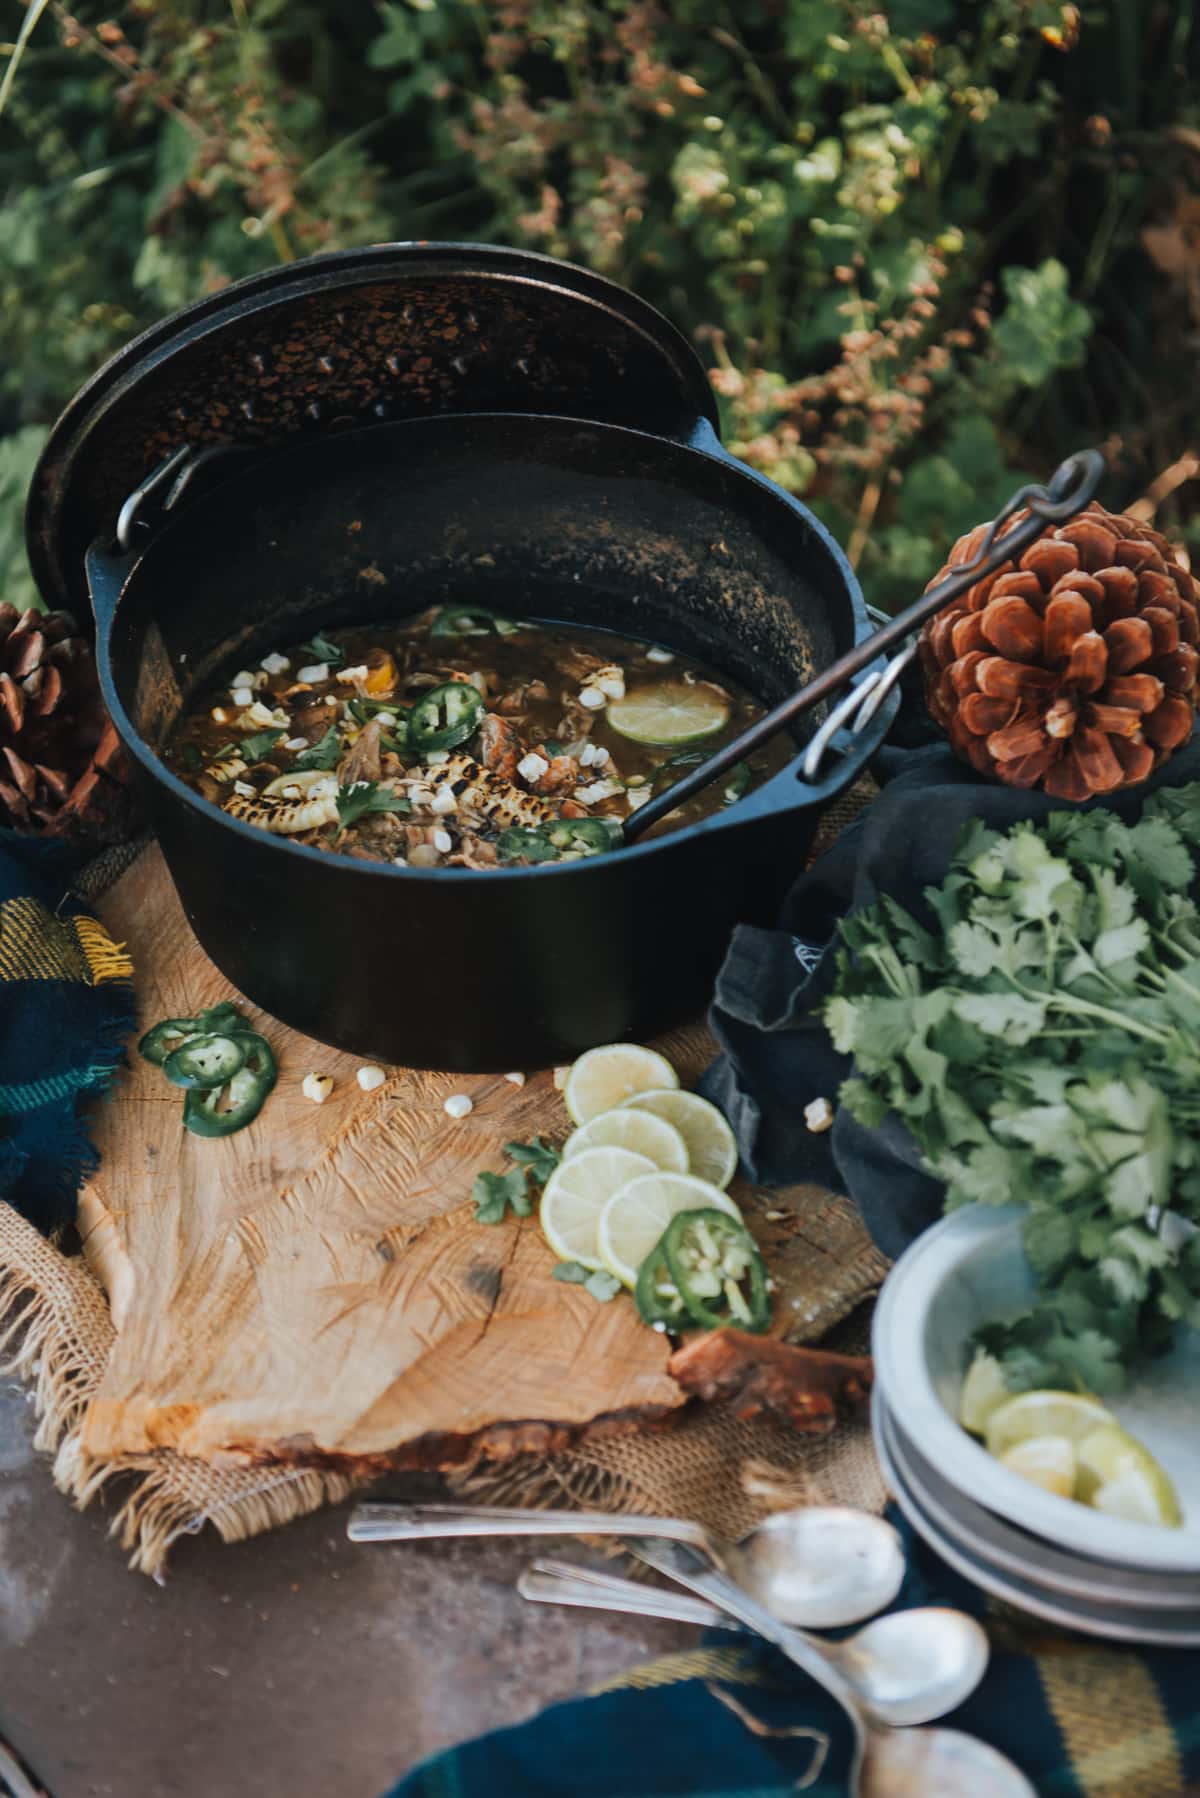 Showing white chicken chili in a Dutch oven outside in a woodland scene on a table with limes, jalapenos and avocados for topping